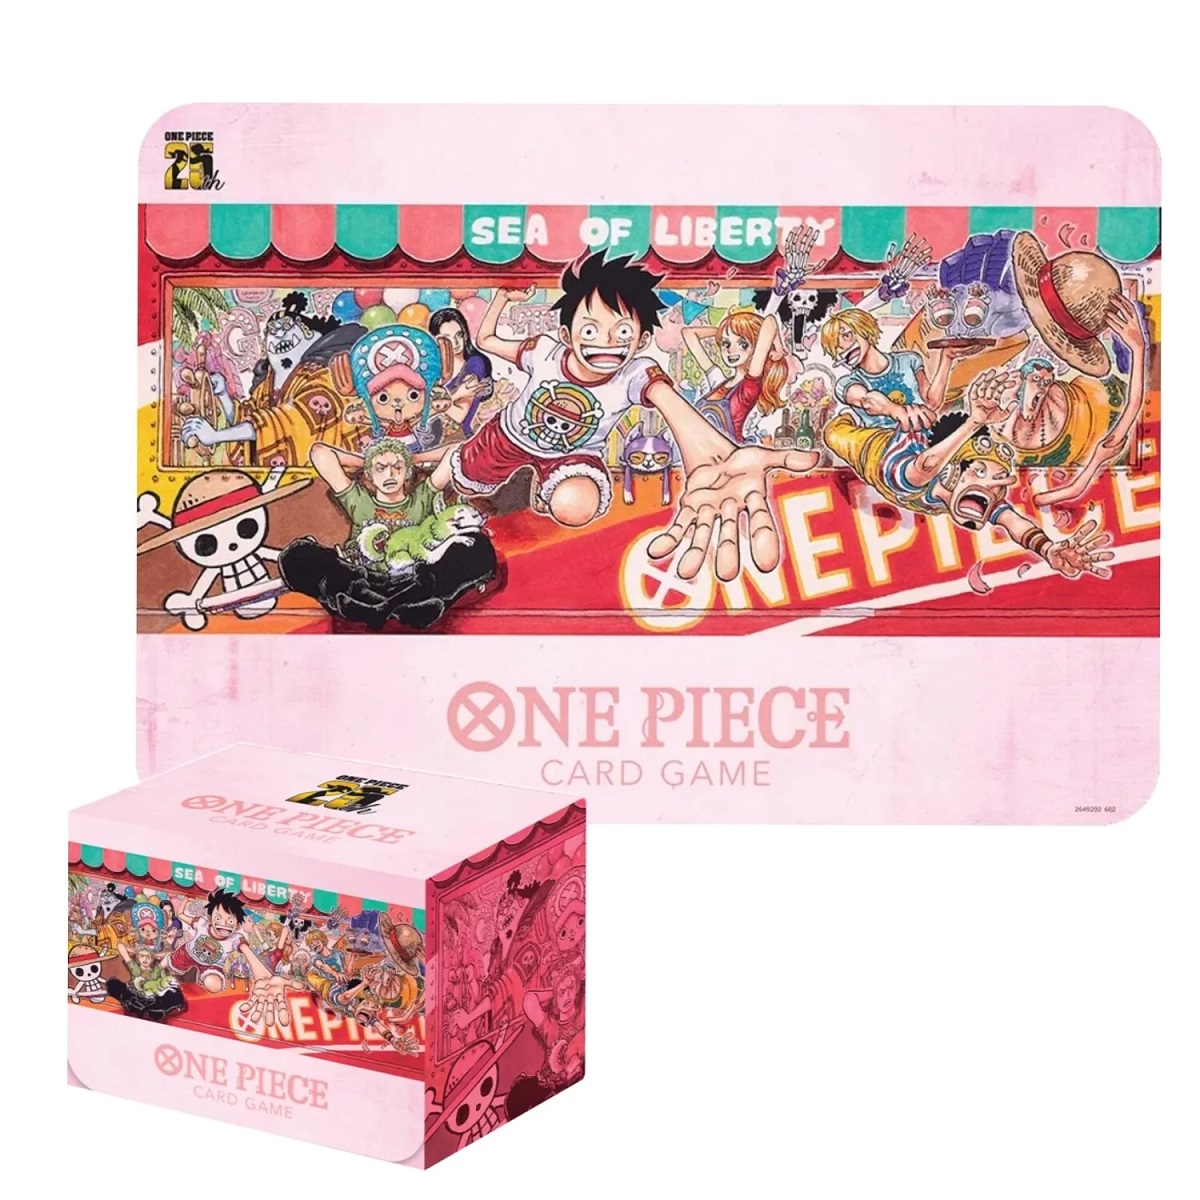 One Piece TCG Playmat and Card Case